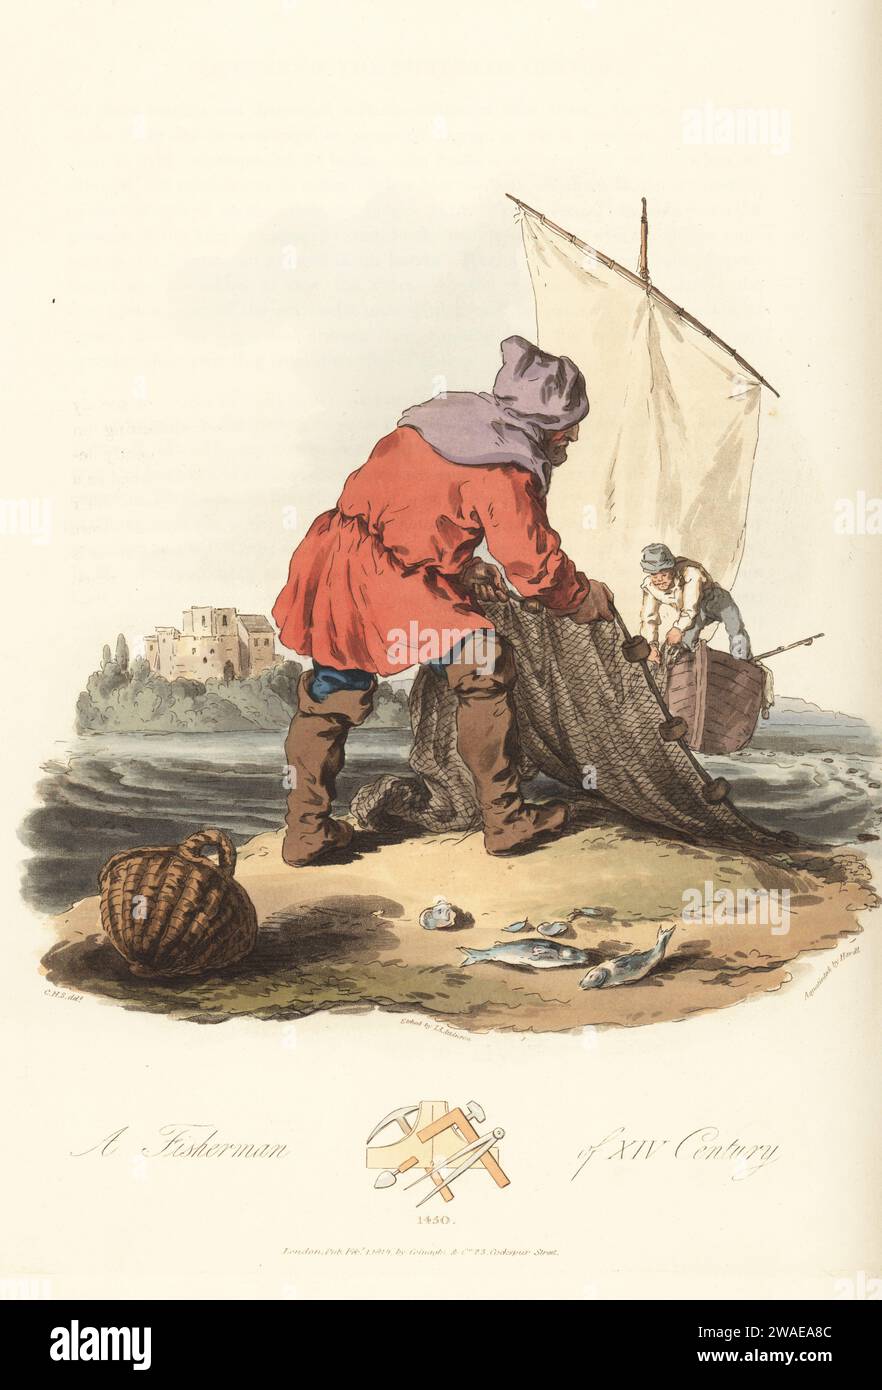 English fisherman of the 15th century. In hood, red baize smock, belt and boots, holding a fishing net on the shore. Tools and implements of masons below. From a manuscript Harley 2838. Handcoloured copperplate engraving etched by John Augustus Atkinson, aquatinted by John Hill, after an illustration by Charles Hamilton Smith from his own Selections of Ancient Costume of Great Britain and Ireland, Colnaghi and Co., London, 1814. Stock Photo